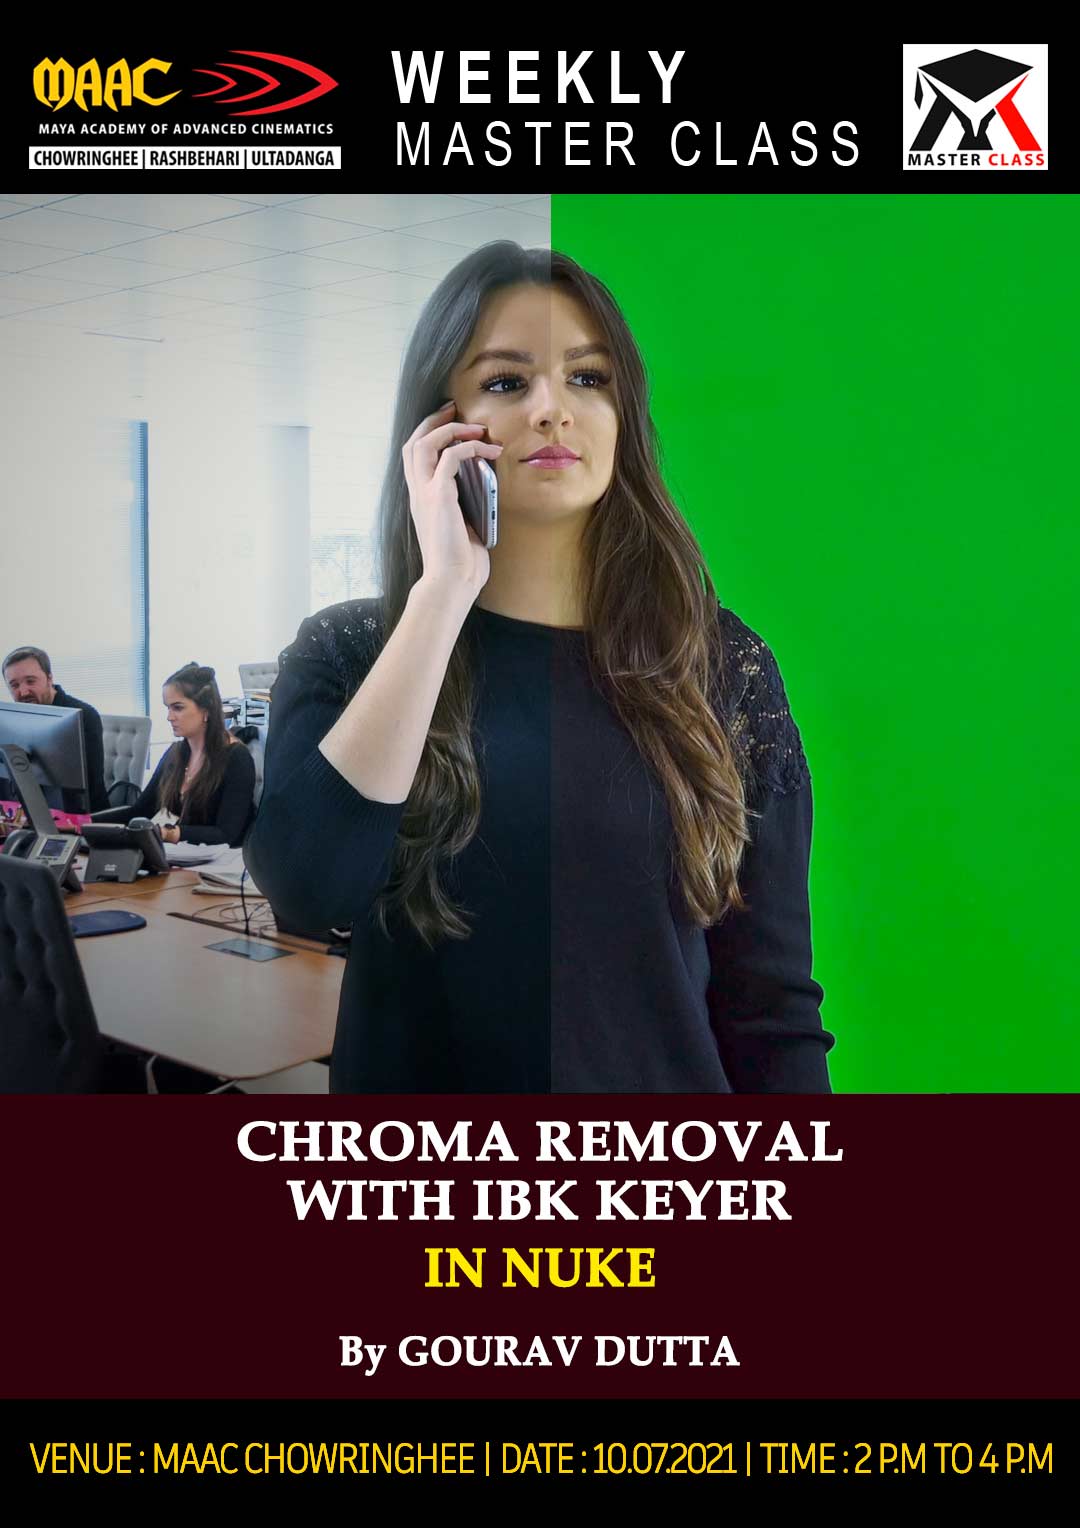 Weekly Master Class on Chroma Removal in Nuke